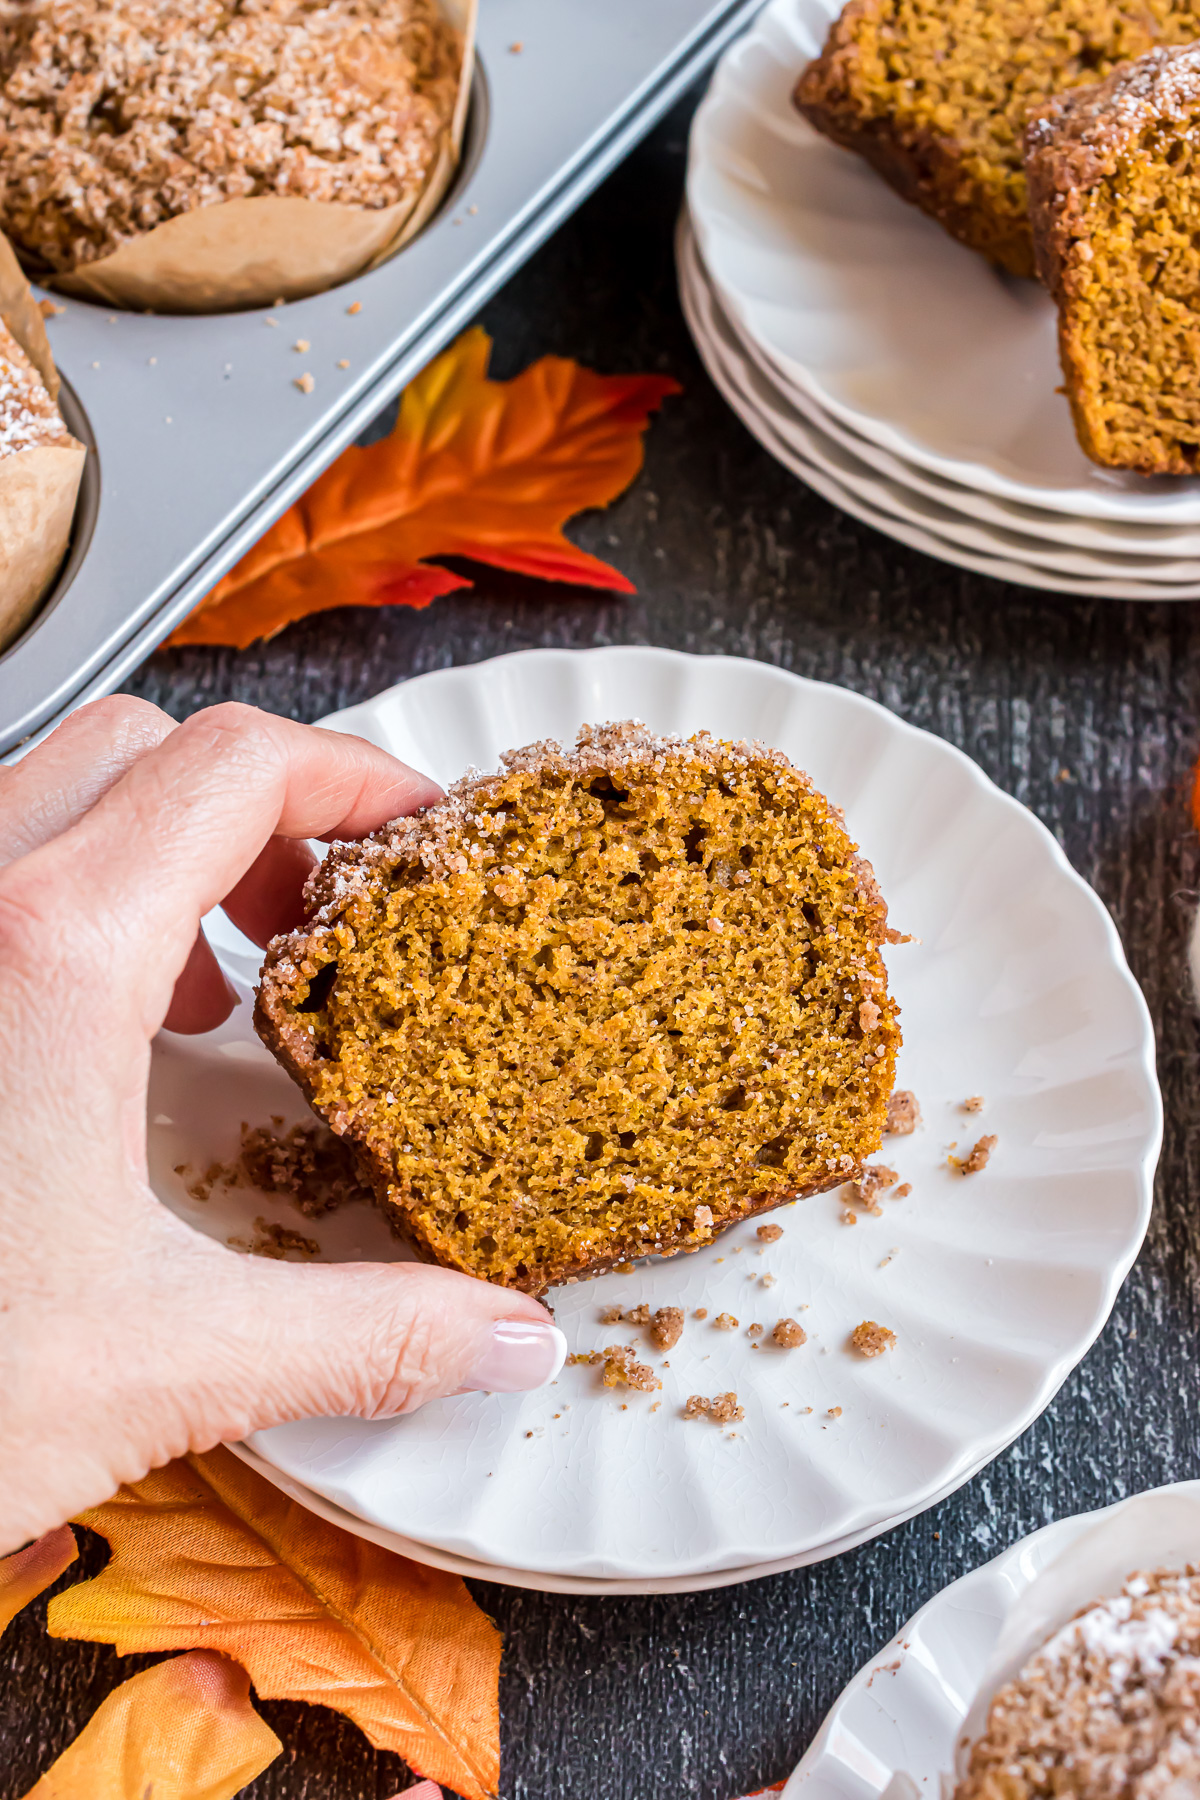 A white scalloped edge plate with half of a pumpkin muffin on it sits on a dark grey wood background. The plate is dotted with streusel crumb topping that has fallen off the muffin. A hand is reaching in from the bottom left hand corner and grabbing the muffin.